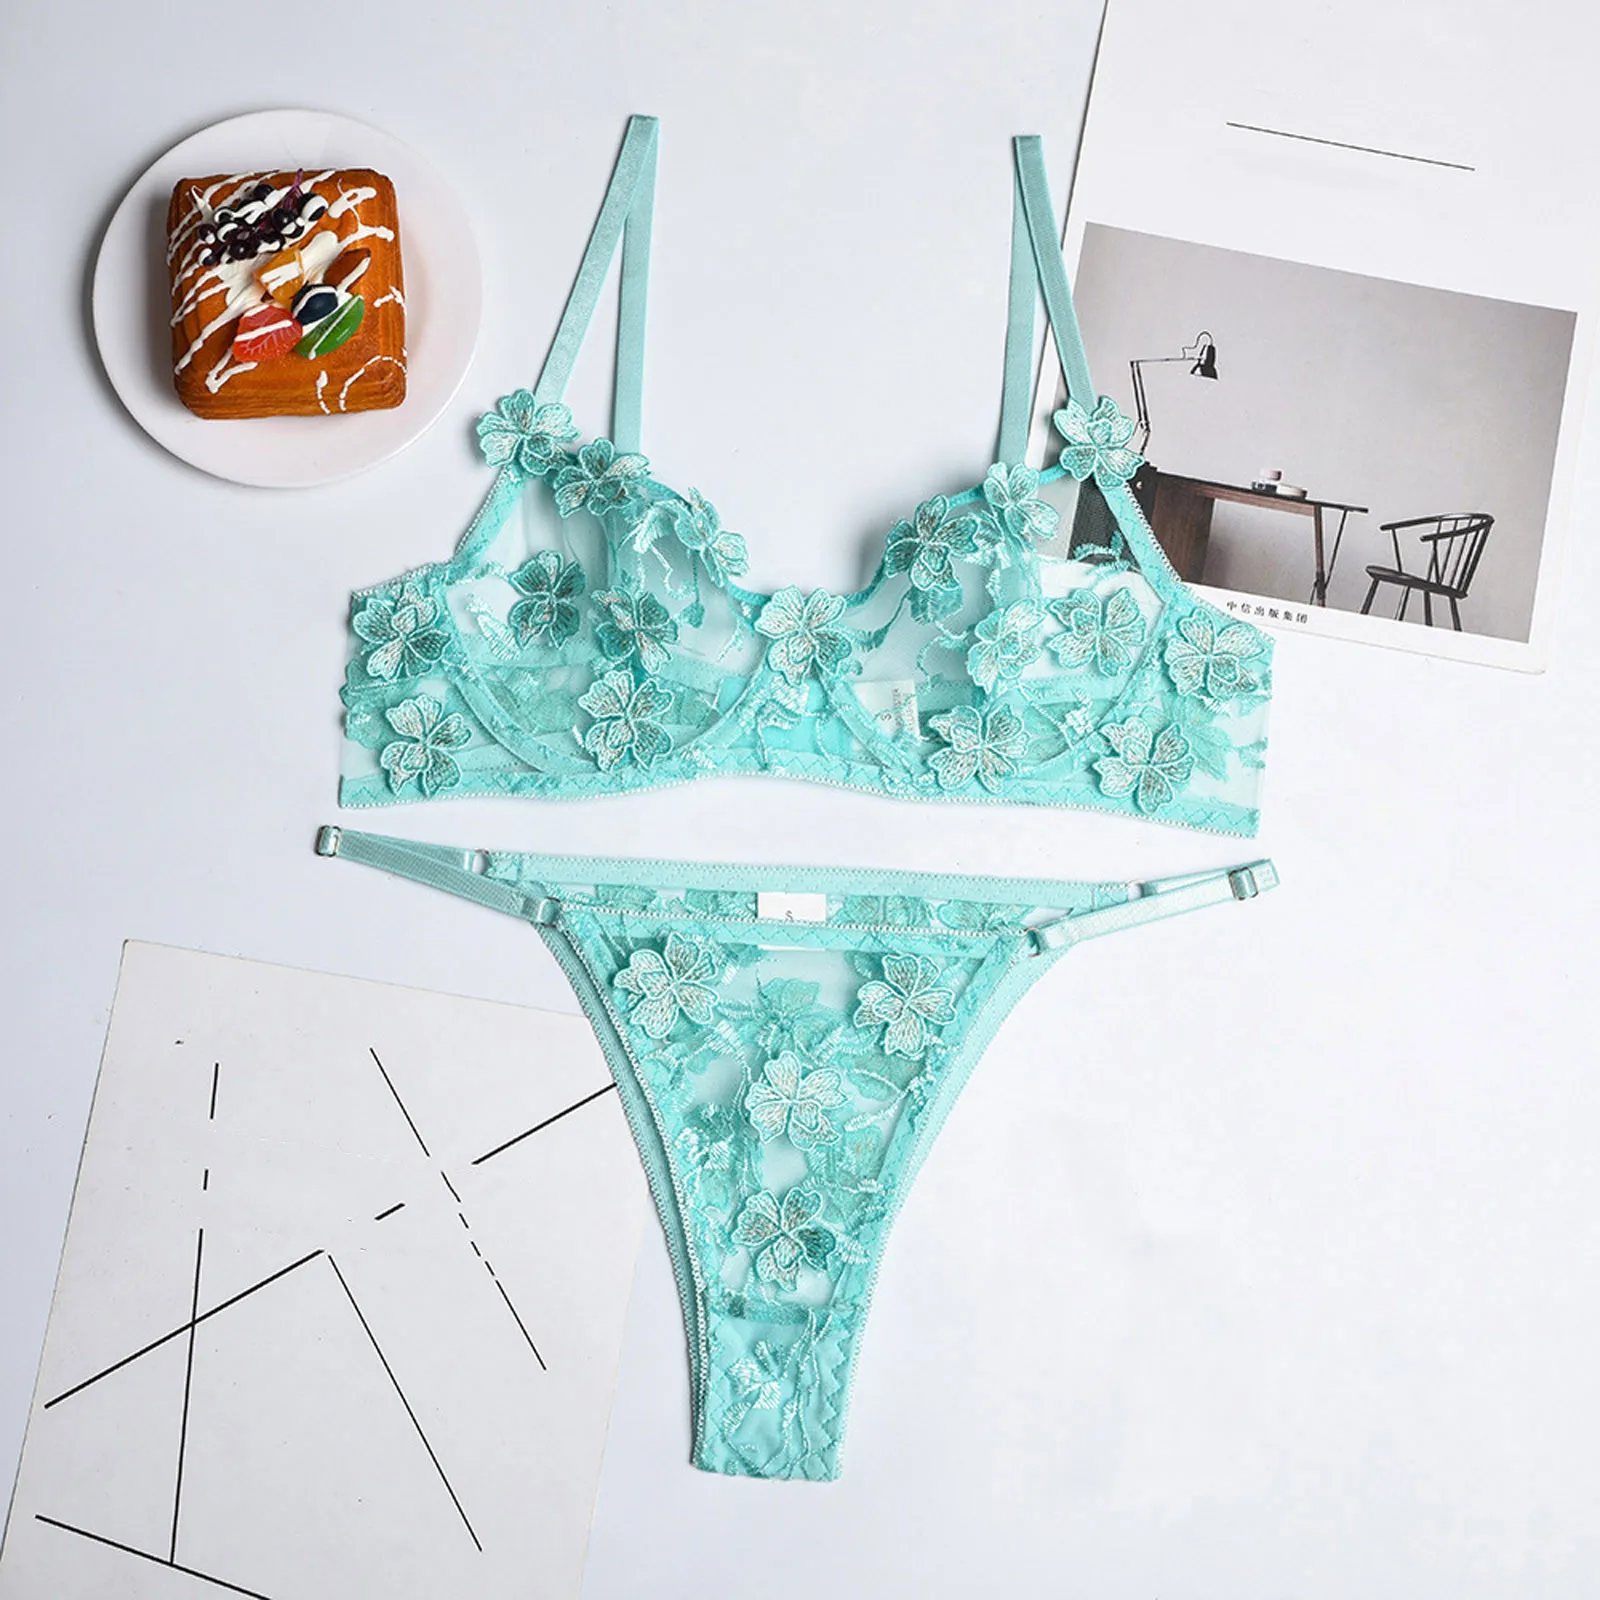 cotton bra and panty sets Women Underwear Set Fashion New Lace Perspective Sexy Lingerie Hot Erotic Bra Brief Sets Temptation Sexy Underwear Sexi Costumes sexy underwear sets